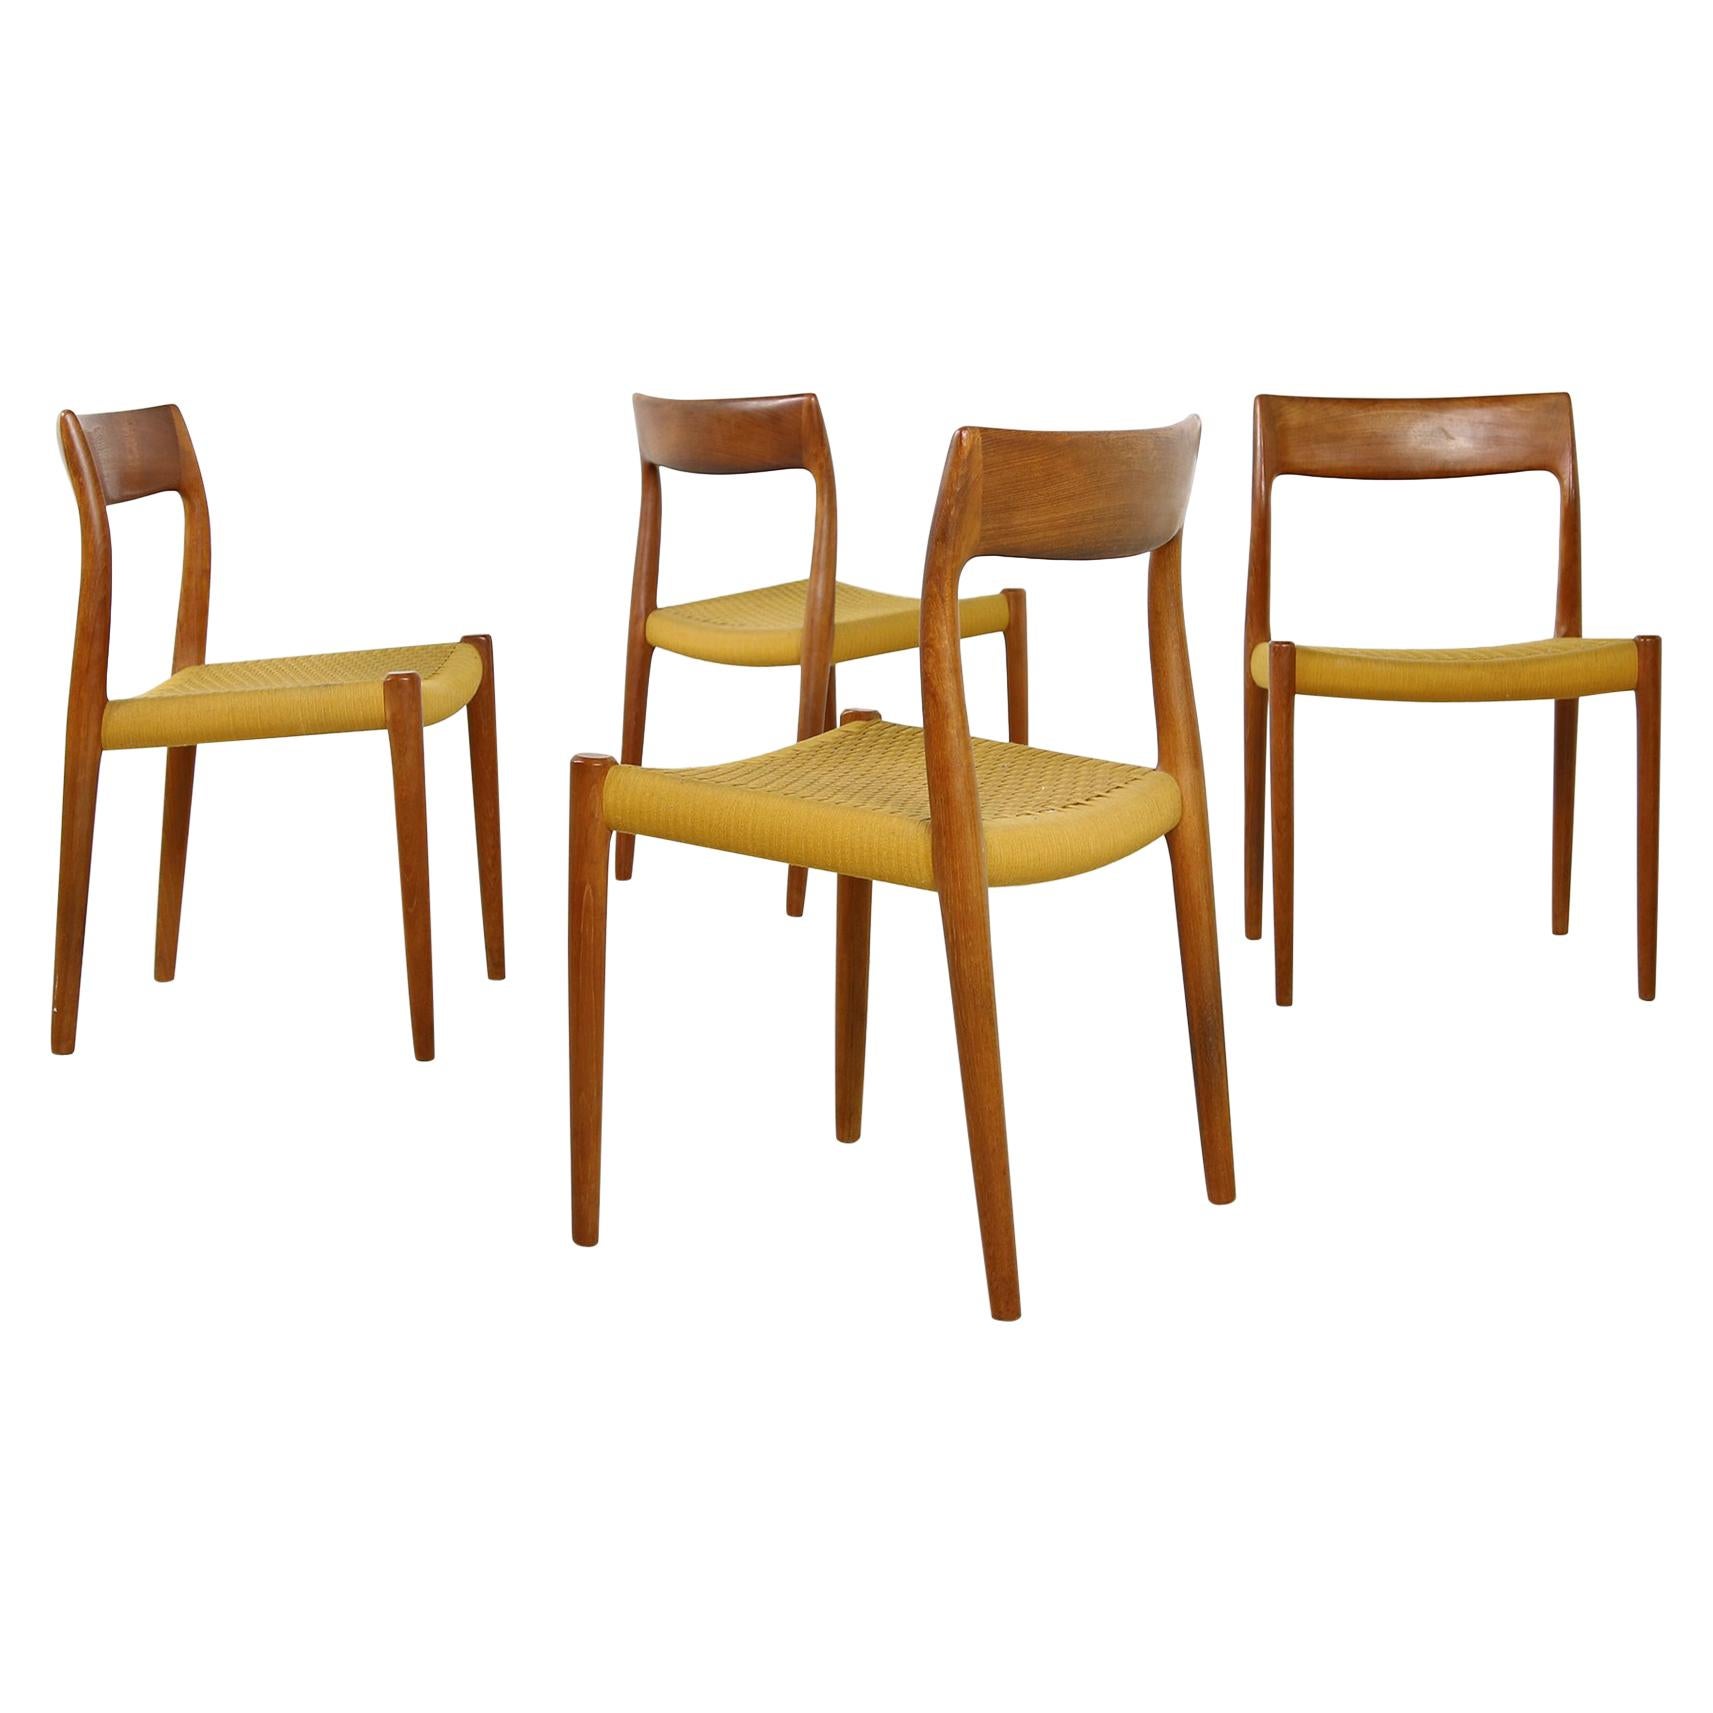 Set of Four 1960s Danish Teak Dining Room Chairs by Niels O. Moller Mod. 77